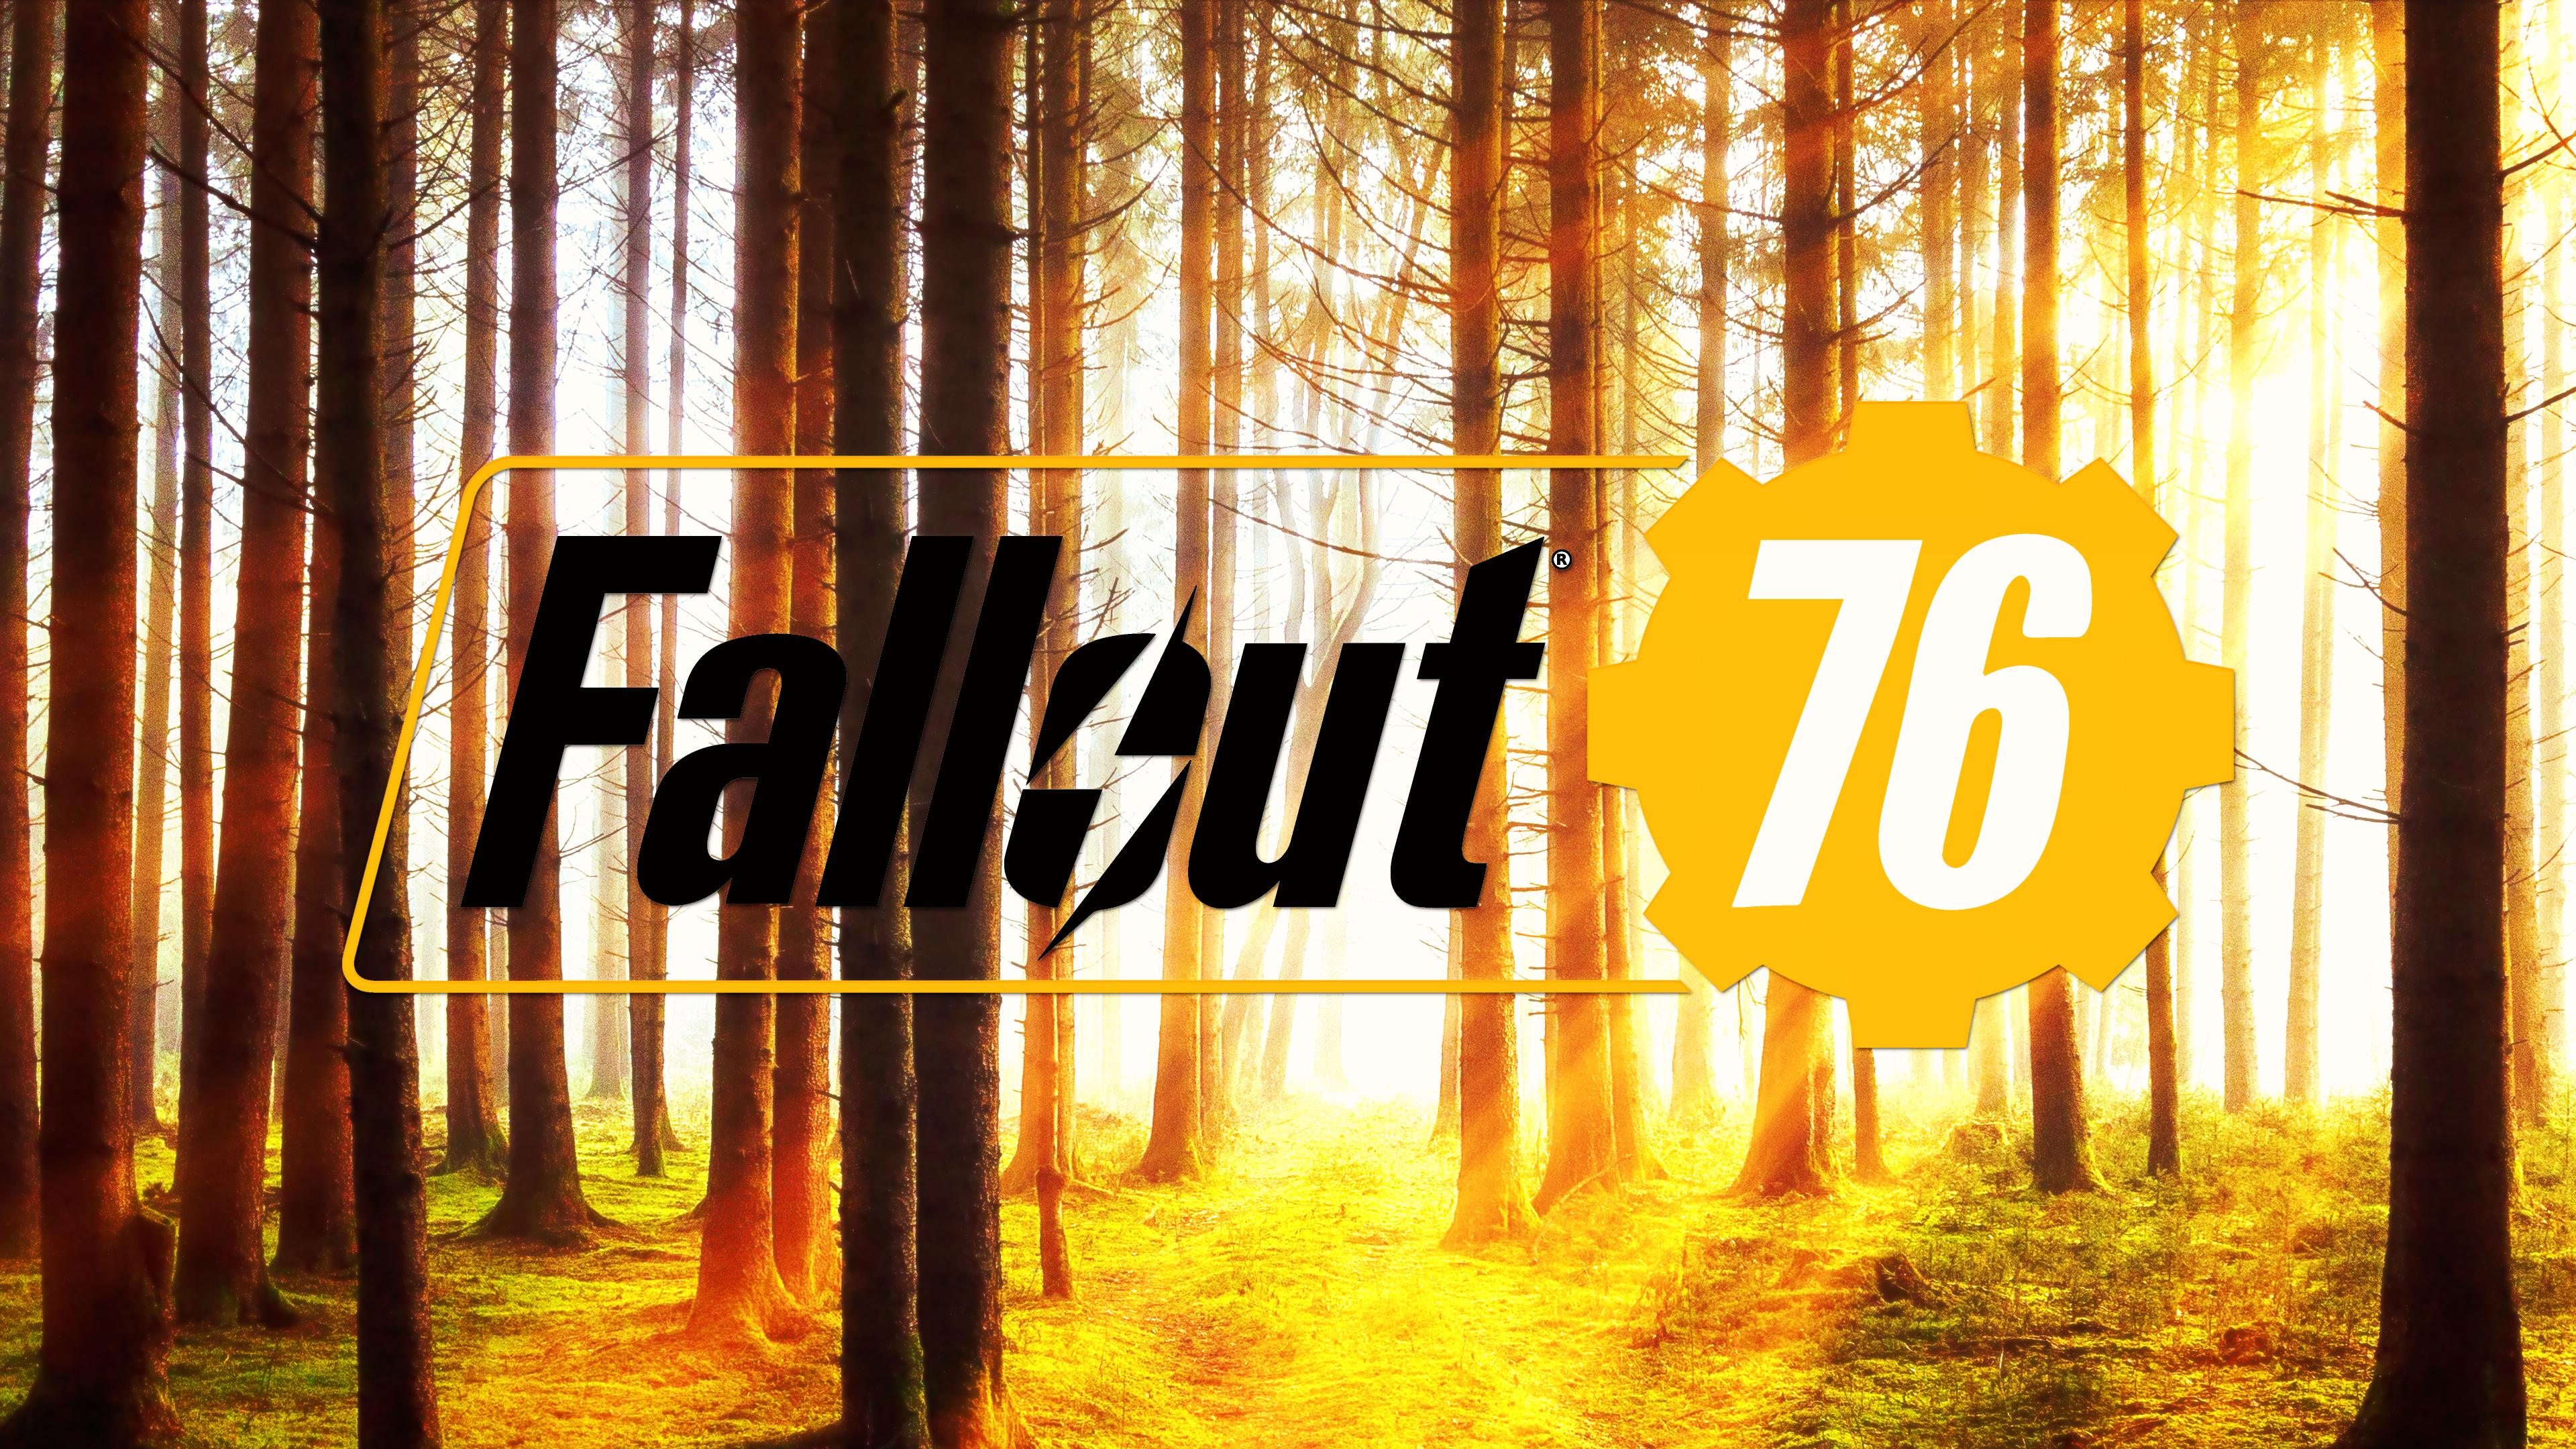 Free Fallout 76 Chromebook Wallpaper Ready For Download